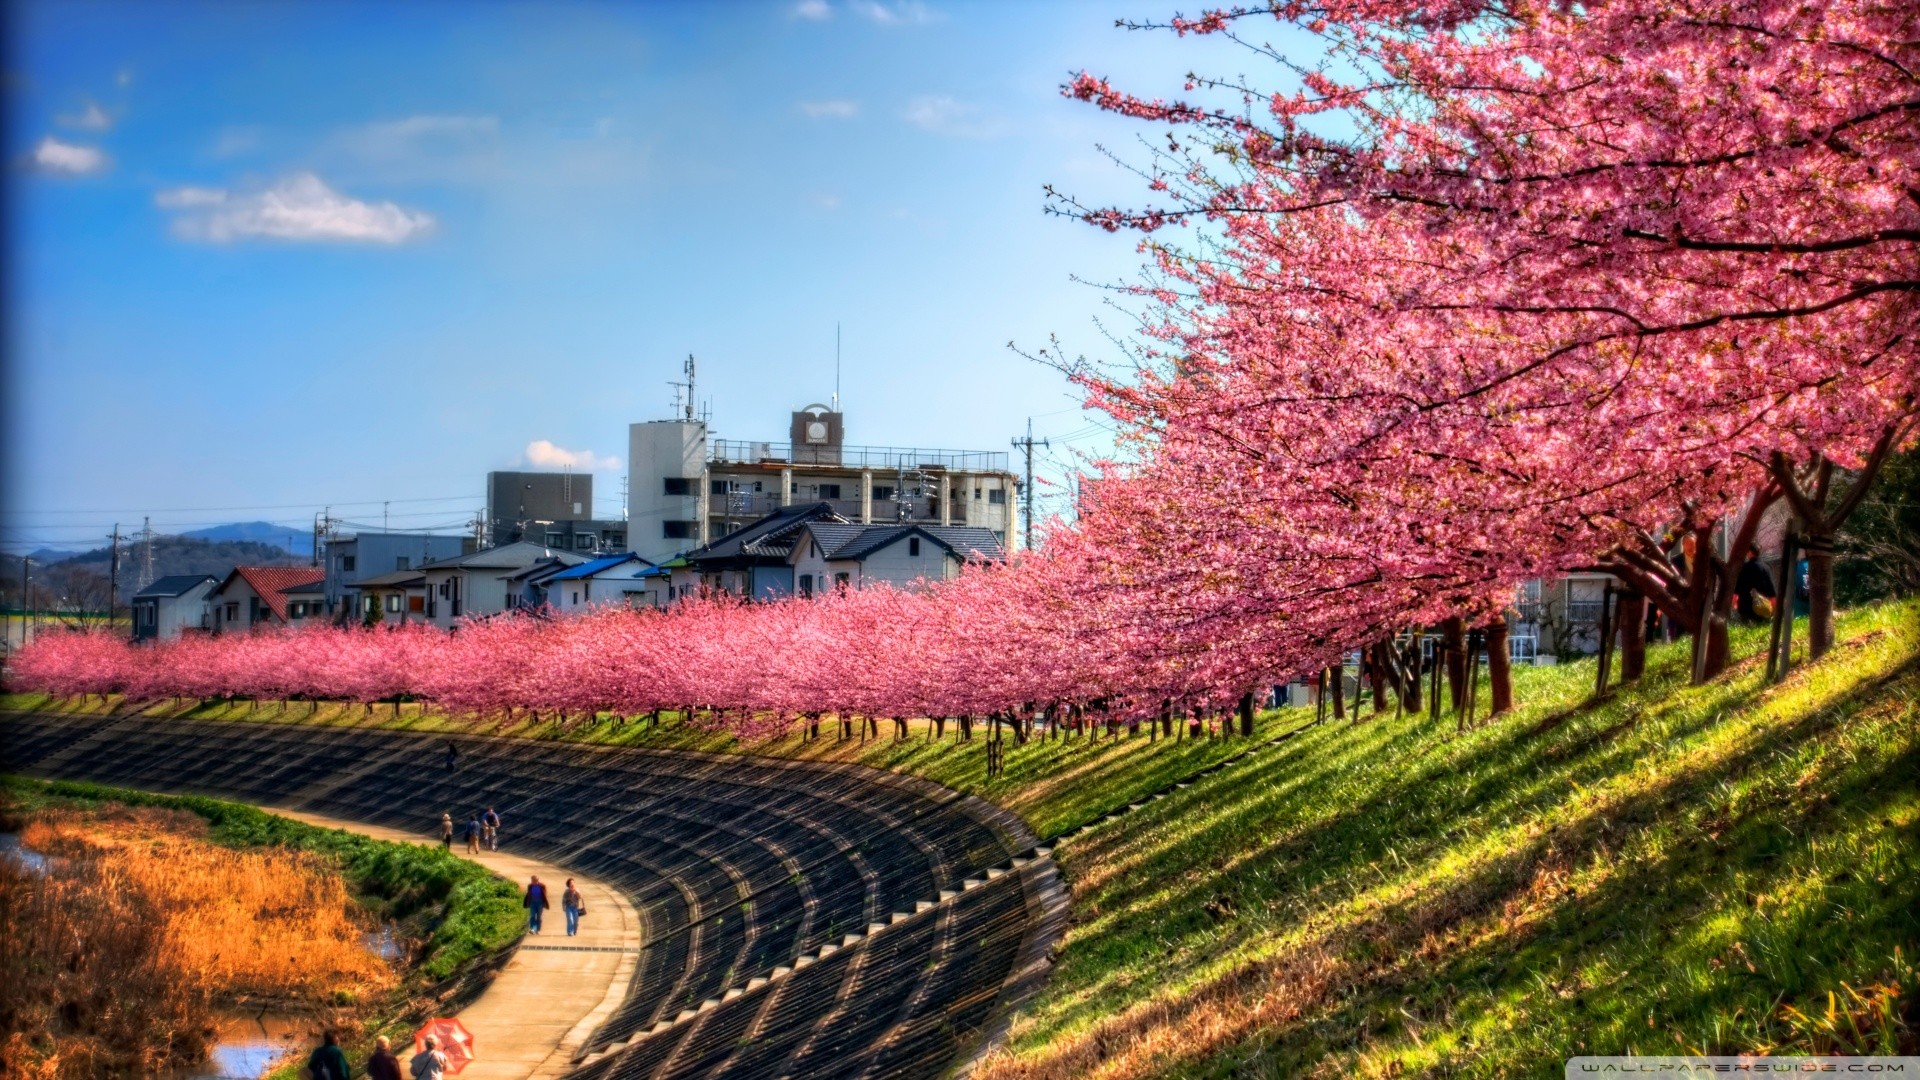 General 1920x1080 sky trees pink path cherry blossom Japan plants outdoors